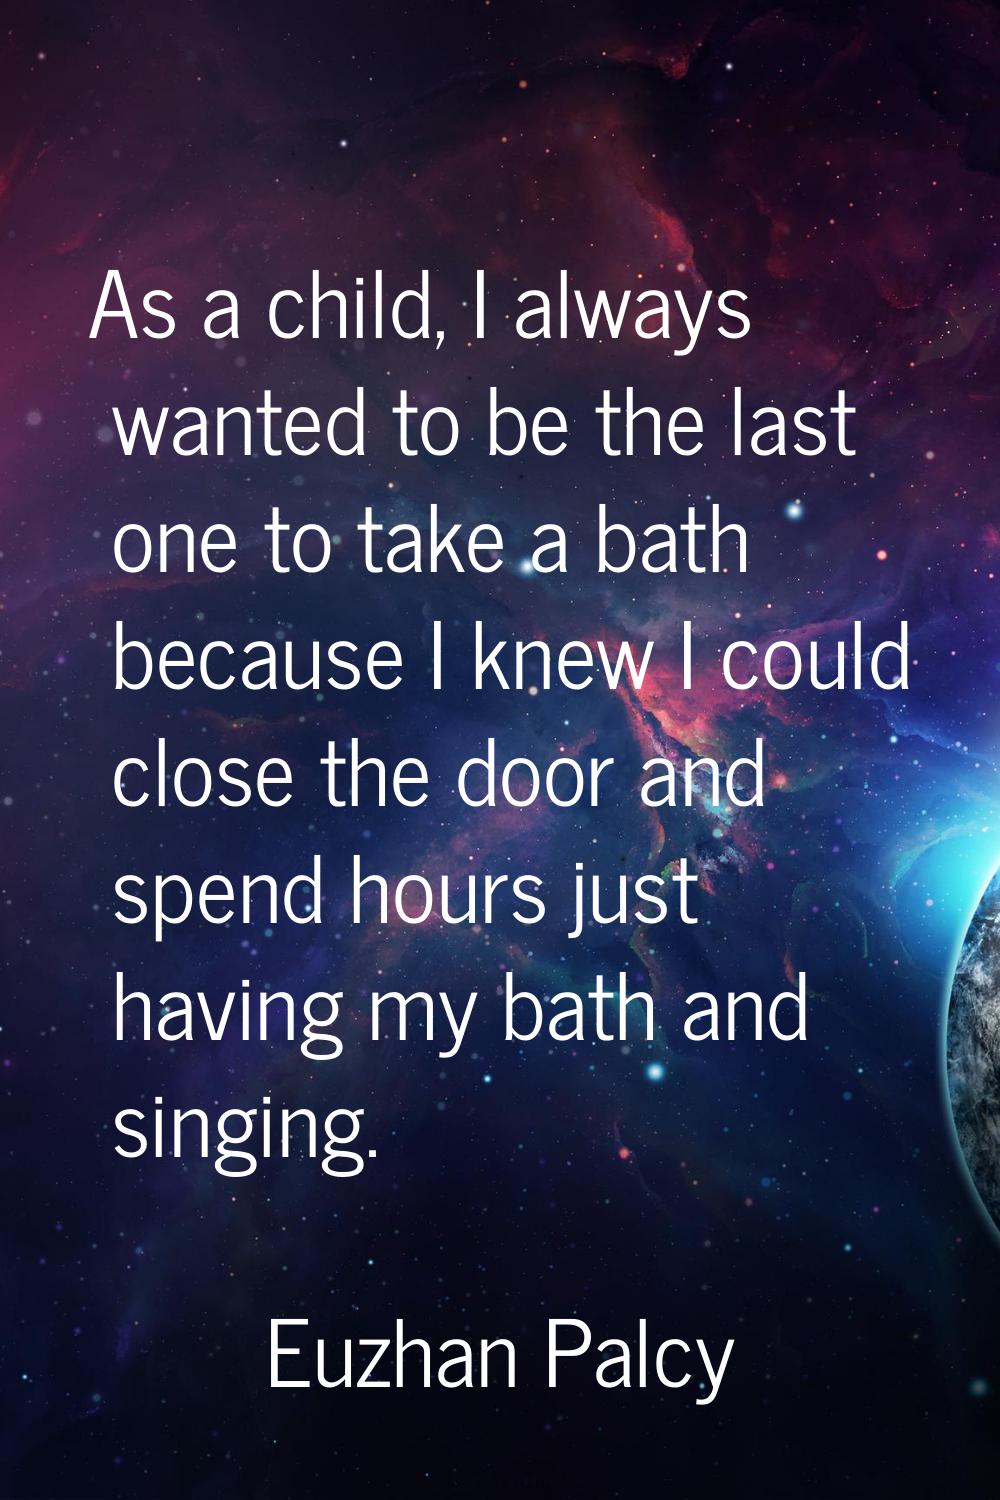 As a child, I always wanted to be the last one to take a bath because I knew I could close the door